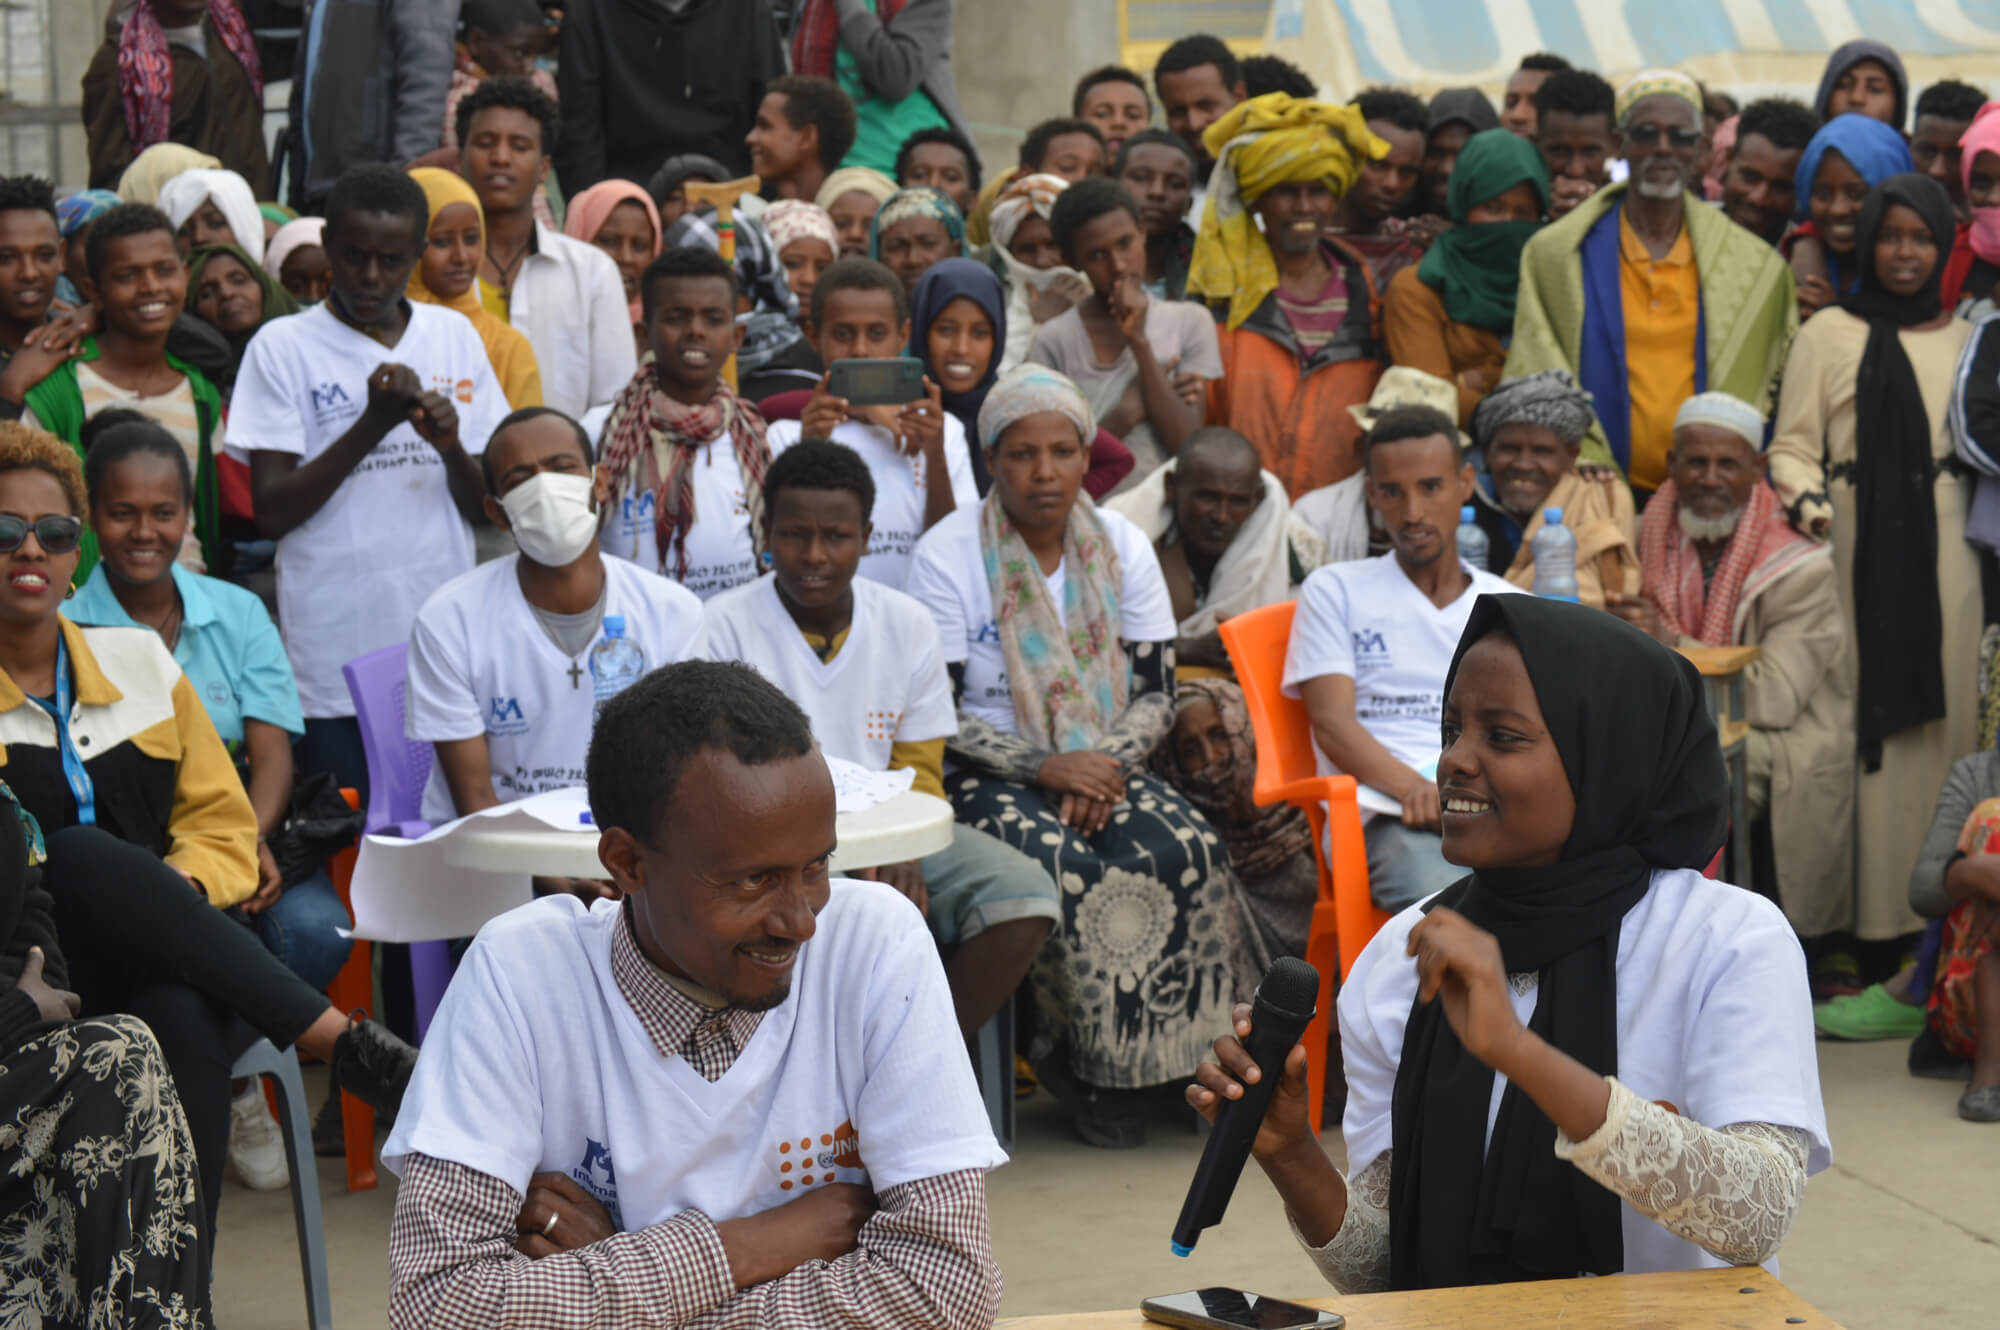 Rehmet Seid (right), an IDP at the China site in Debere Berhan, Ethiopia, answers questions during the quiz competition.